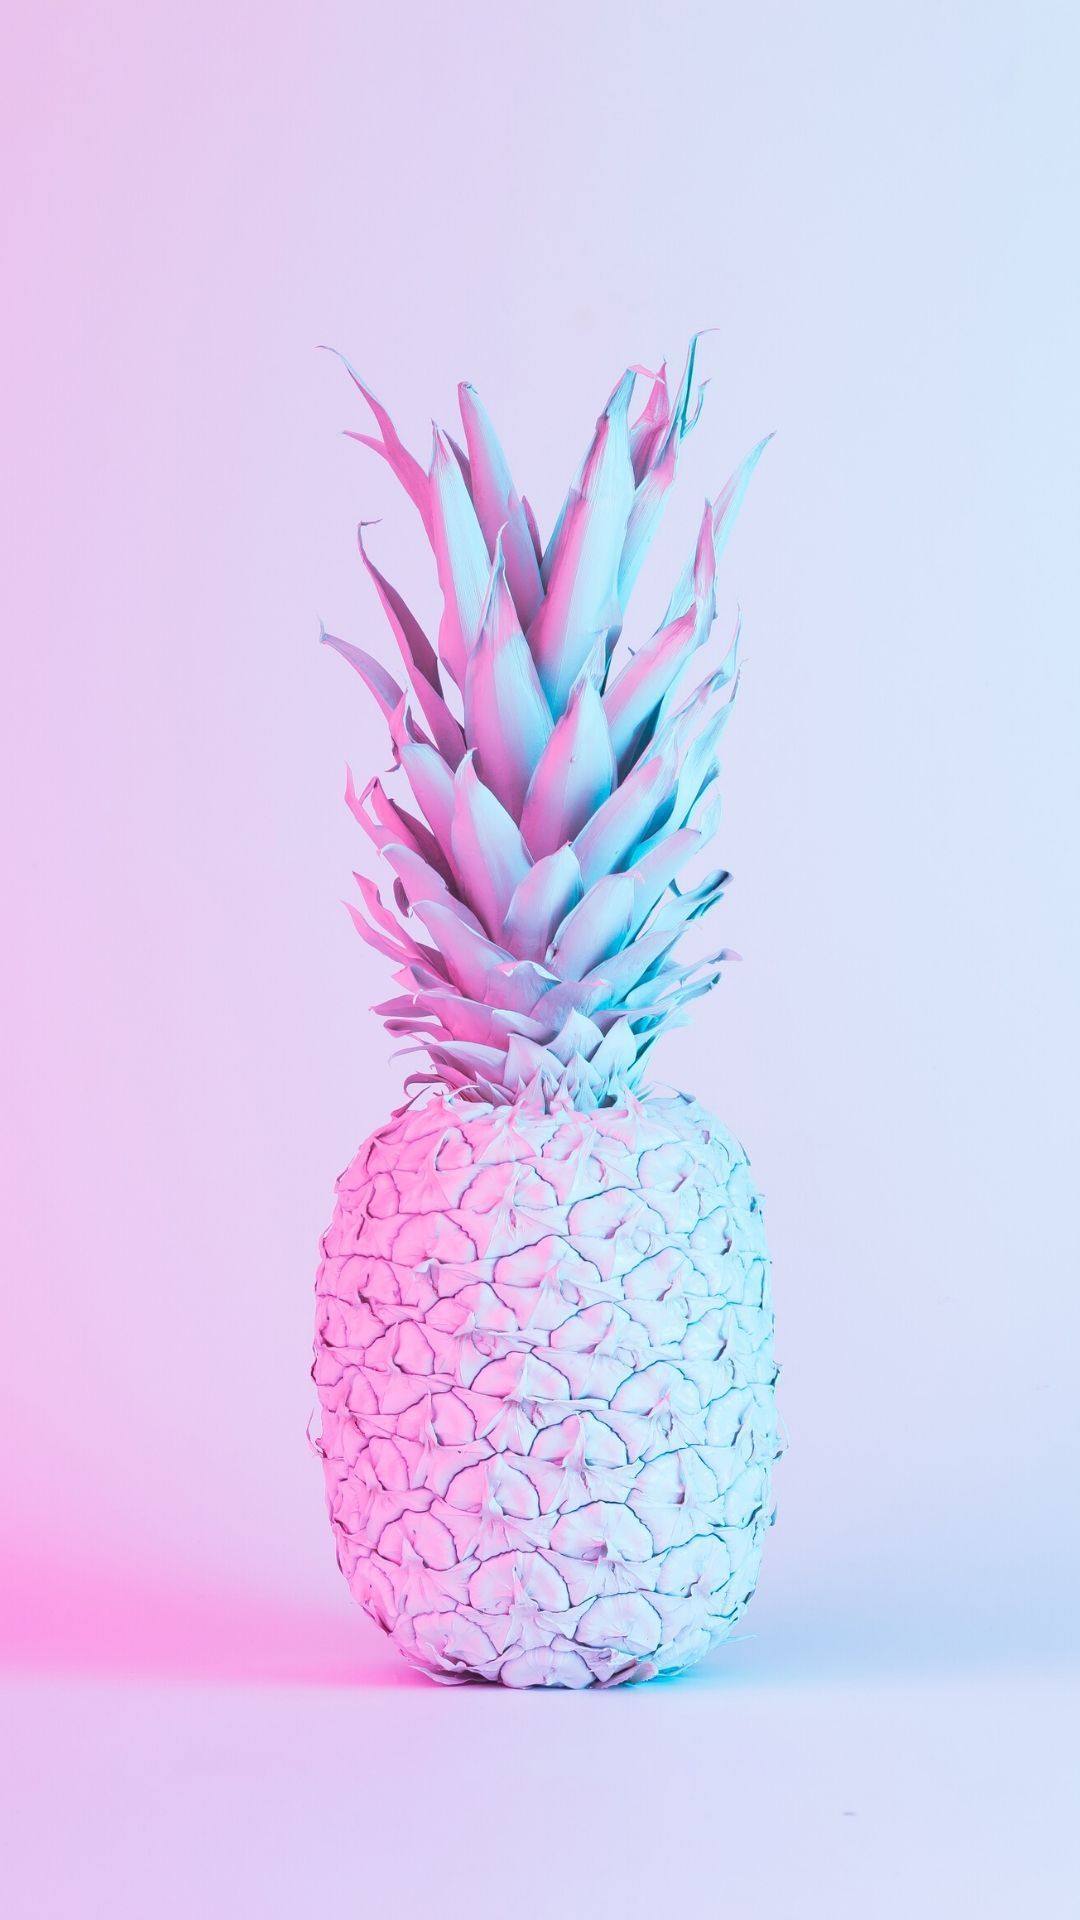 Pineapple Wallpaper for iPhone [Free Downloads] One Percent. Pineapple wallpaper, Pink wallpaper iphone, iPhone wallpaper girly